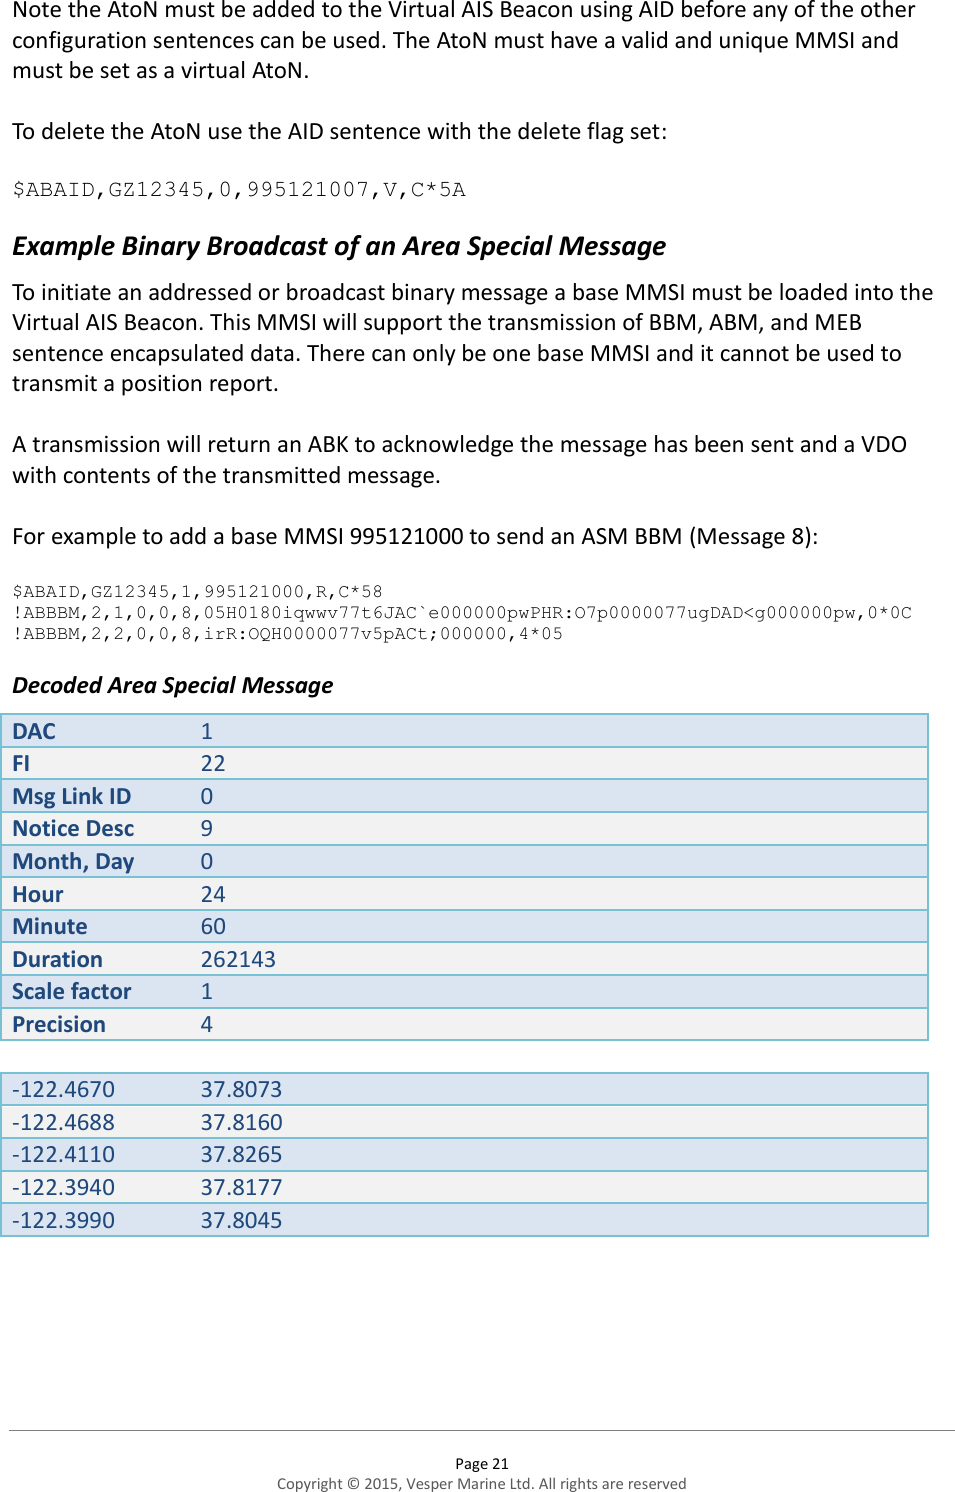  Page 21 Copyright © 2015, Vesper Marine Ltd. All rights are reserved  Note the AtoN must be added to the Virtual AIS Beacon using AID before any of the other configuration sentences can be used. The AtoN must have a valid and unique MMSI and must be set as a virtual AtoN.   To delete the AtoN use the AID sentence with the delete flag set:  $ABAID,GZ12345,0,995121007,V,C*5A Example Binary Broadcast of an Area Special Message To initiate an addressed or broadcast binary message a base MMSI must be loaded into the Virtual AIS Beacon. This MMSI will support the transmission of BBM, ABM, and MEB sentence encapsulated data. There can only be one base MMSI and it cannot be used to transmit a position report.   A transmission will return an ABK to acknowledge the message has been sent and a VDO with contents of the transmitted message.  For example to add a base MMSI 995121000 to send an ASM BBM (Message 8):   $ABAID,GZ12345,1,995121000,R,C*58 !ABBBM,2,1,0,0,8,05H0180iqwwv77t6JAC`e000000pwPHR:O7p0000077ugDAD&lt;g000000pw,0*0C !ABBBM,2,2,0,0,8,irR:OQH0000077v5pACt;000000,4*05 Decoded Area Special Message DAC 1 FI 22 Msg Link ID 0 Notice Desc 9 Month, Day 0 Hour 24 Minute 60 Duration 262143 Scale factor 1 Precision 4  -122.4670 37.8073 -122.4688 37.8160 -122.4110 37.8265 -122.3940 37.8177 -122.3990 37.8045    